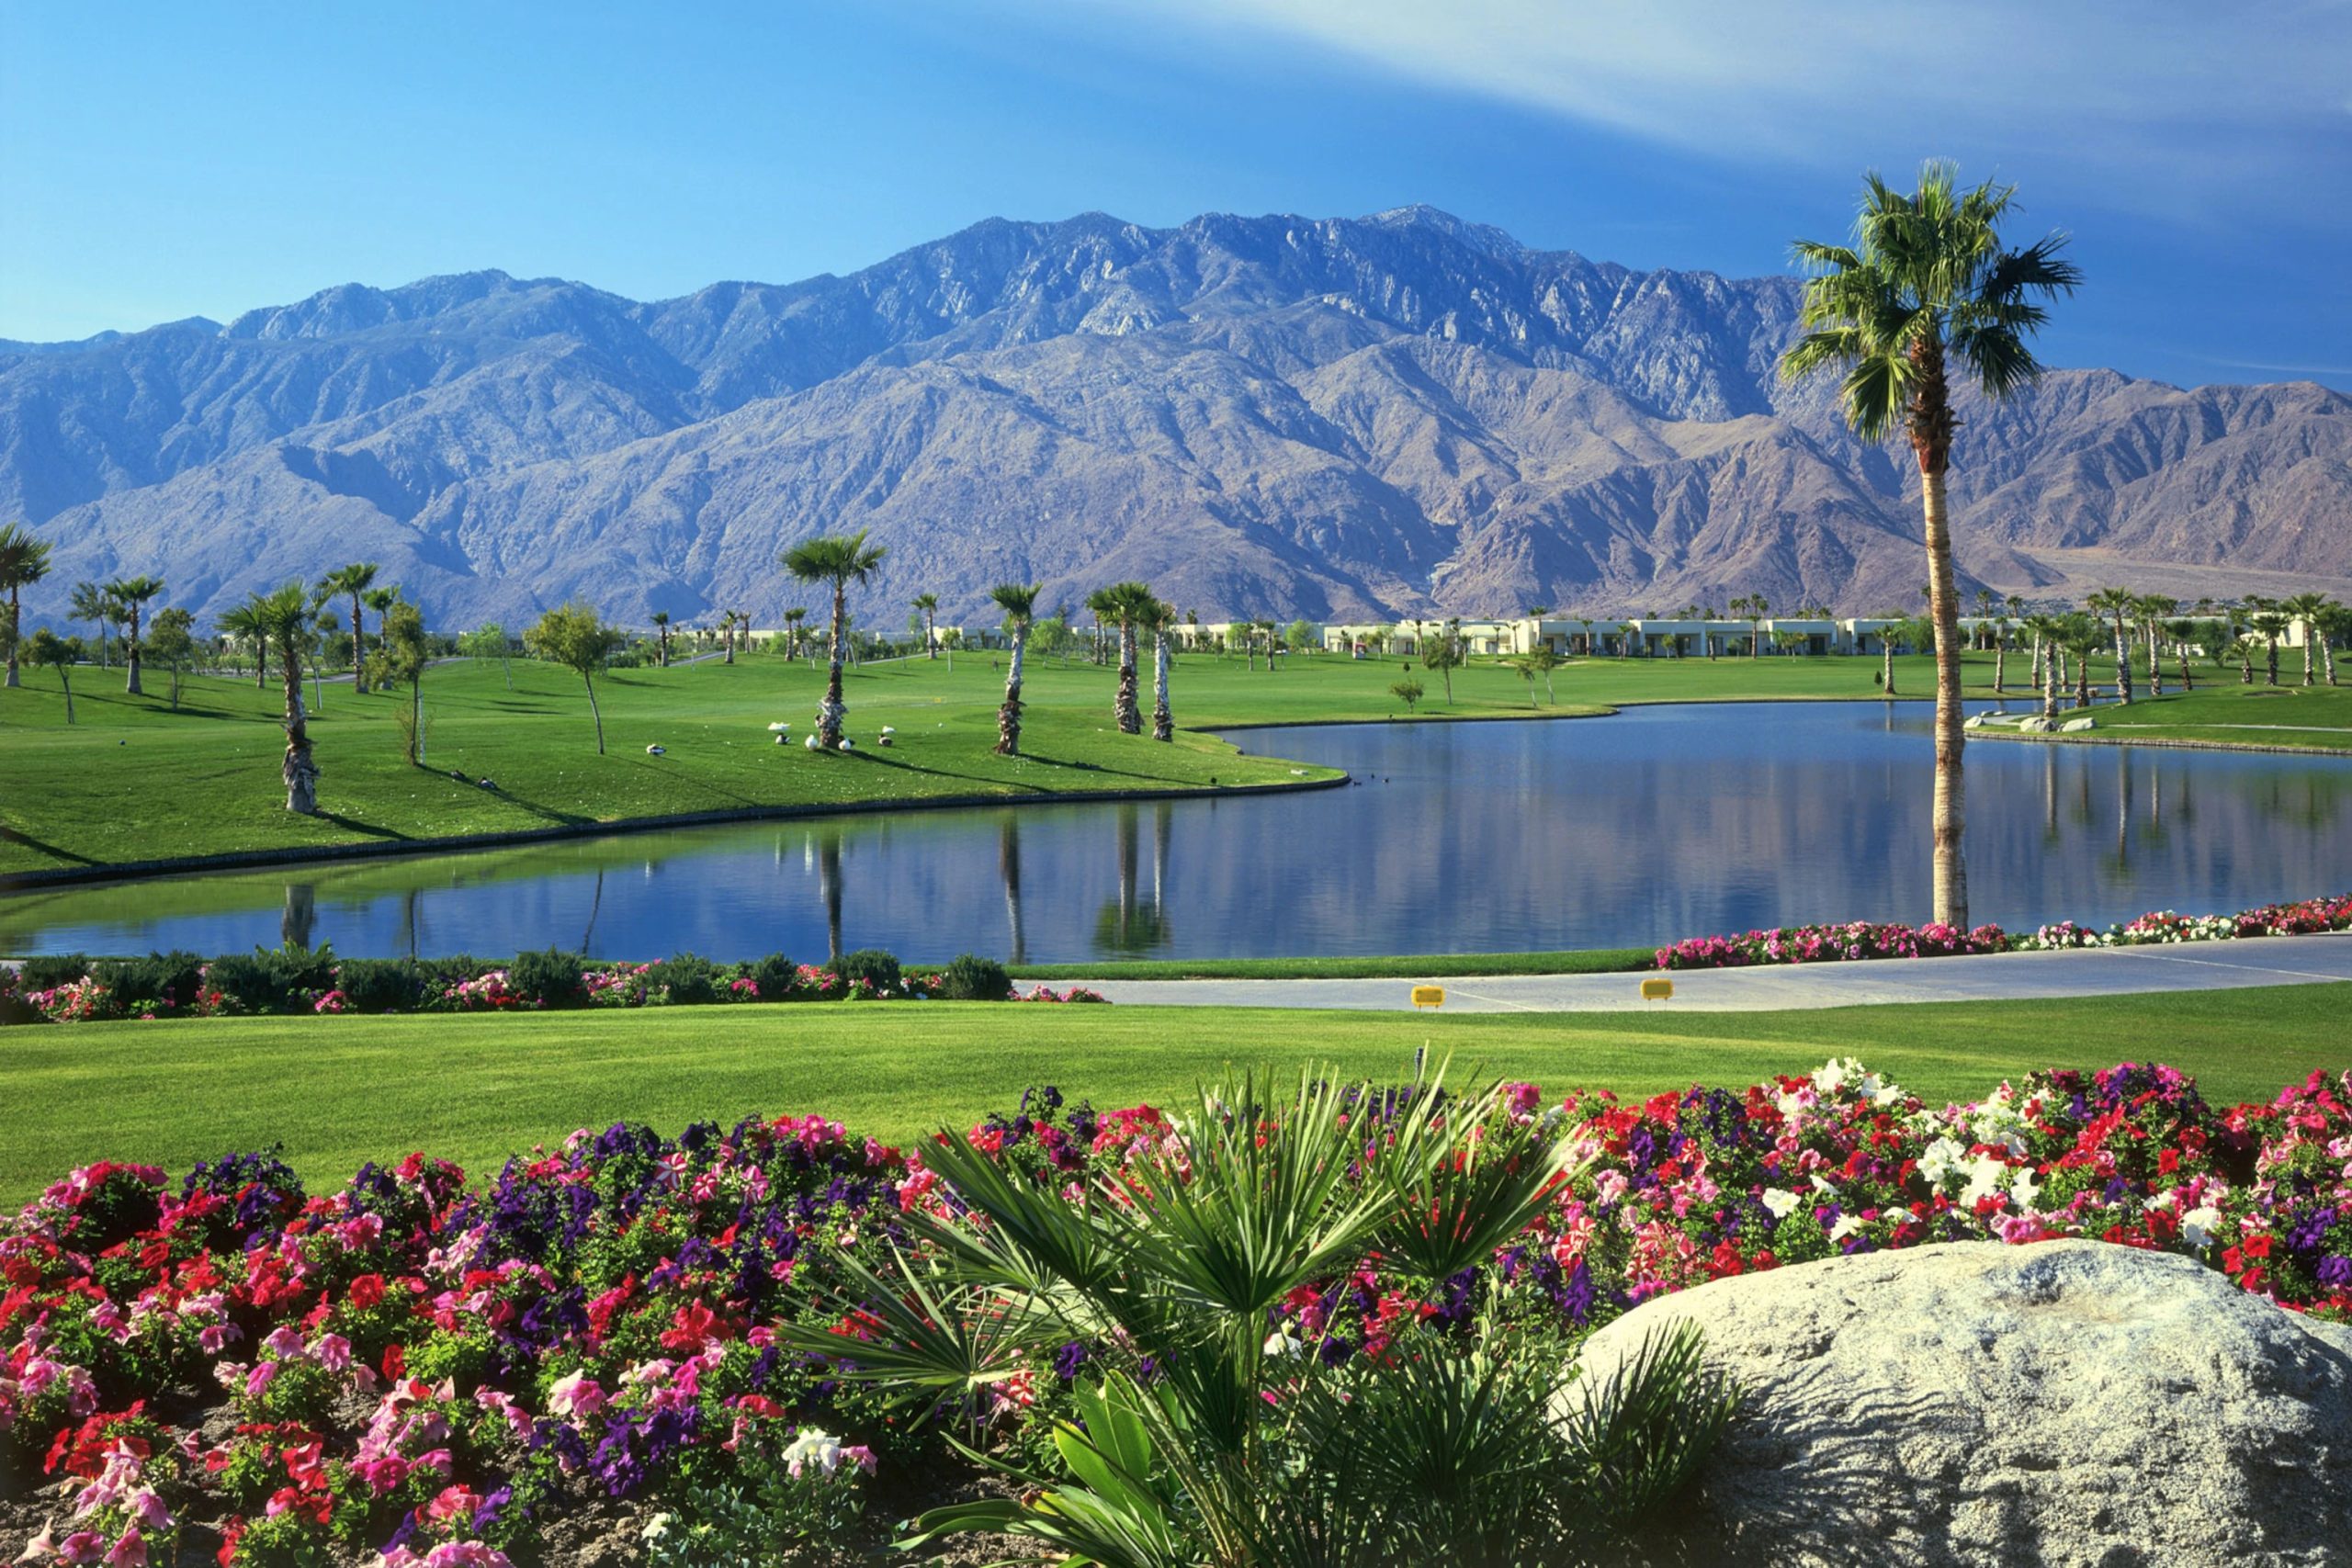 What Is Palm Springs Best Known For?